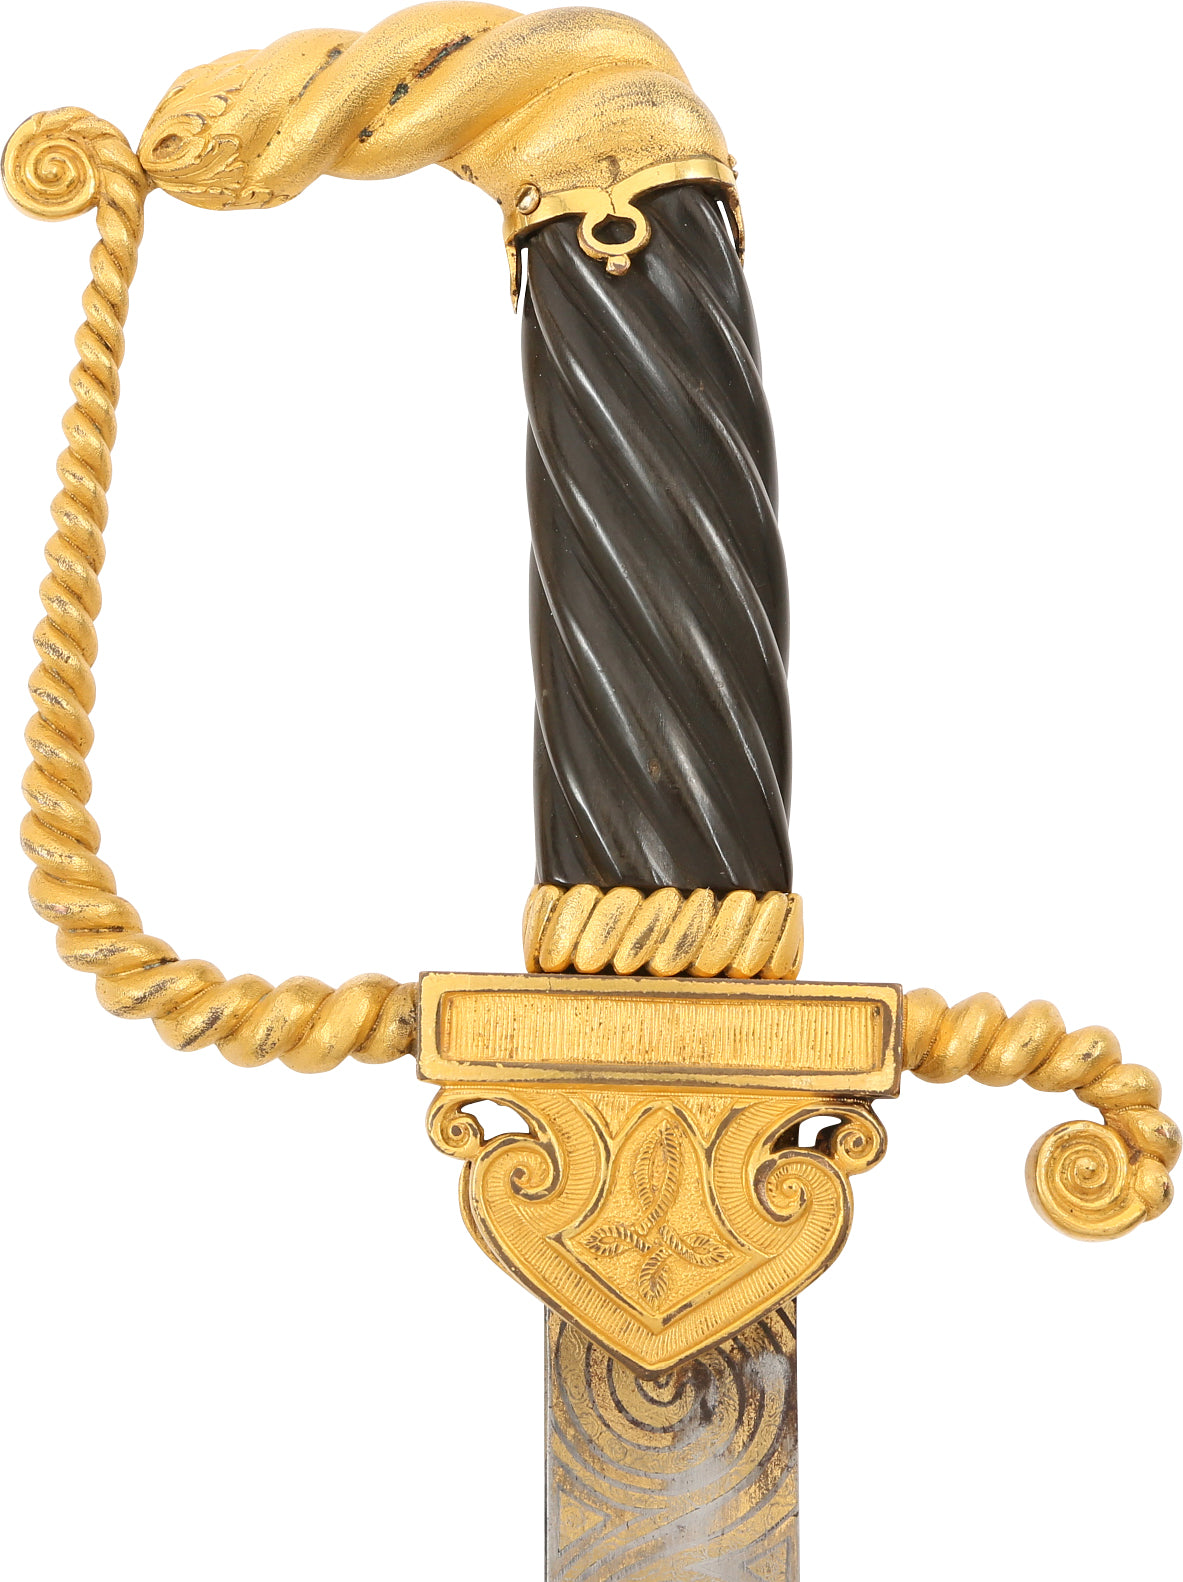 A FINE BRITISH OFFICER’S PRESENTATION SWORD OF THE NAPOLEONIC PERIOD - Fagan Arms